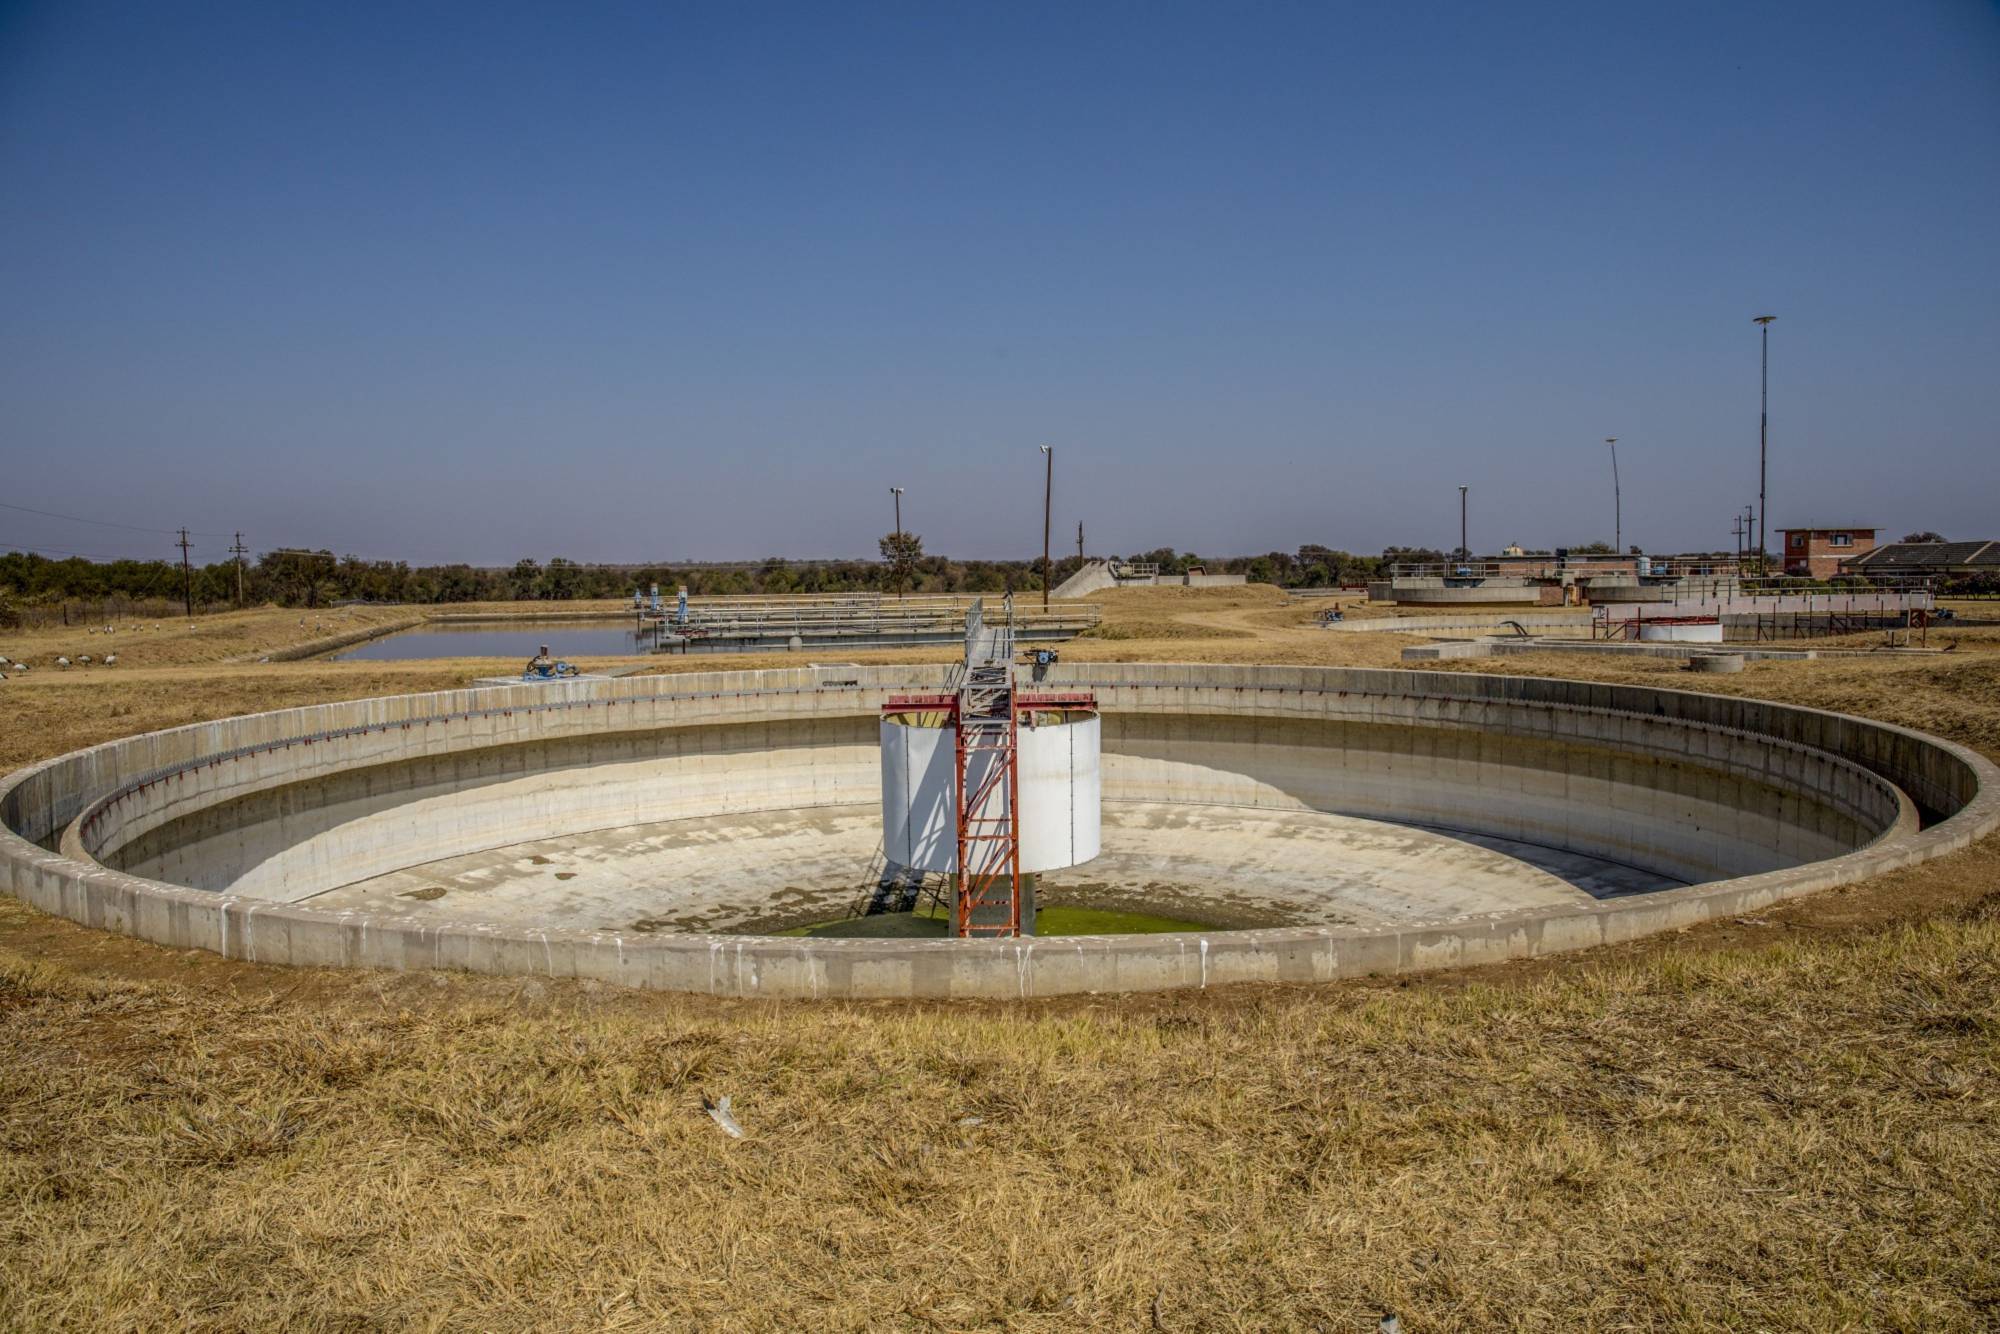 A sewer treatment pool in Bulawayo, Zimbabwe. Experts in the field — known as wastewater epidemiology — say that as countries begin to ease pandemic lockdown restrictions, searching sewage for signs of the SARS-CoV-2 coronavirus could help them monitor and respond to flare-ups. | BLOOMBERG